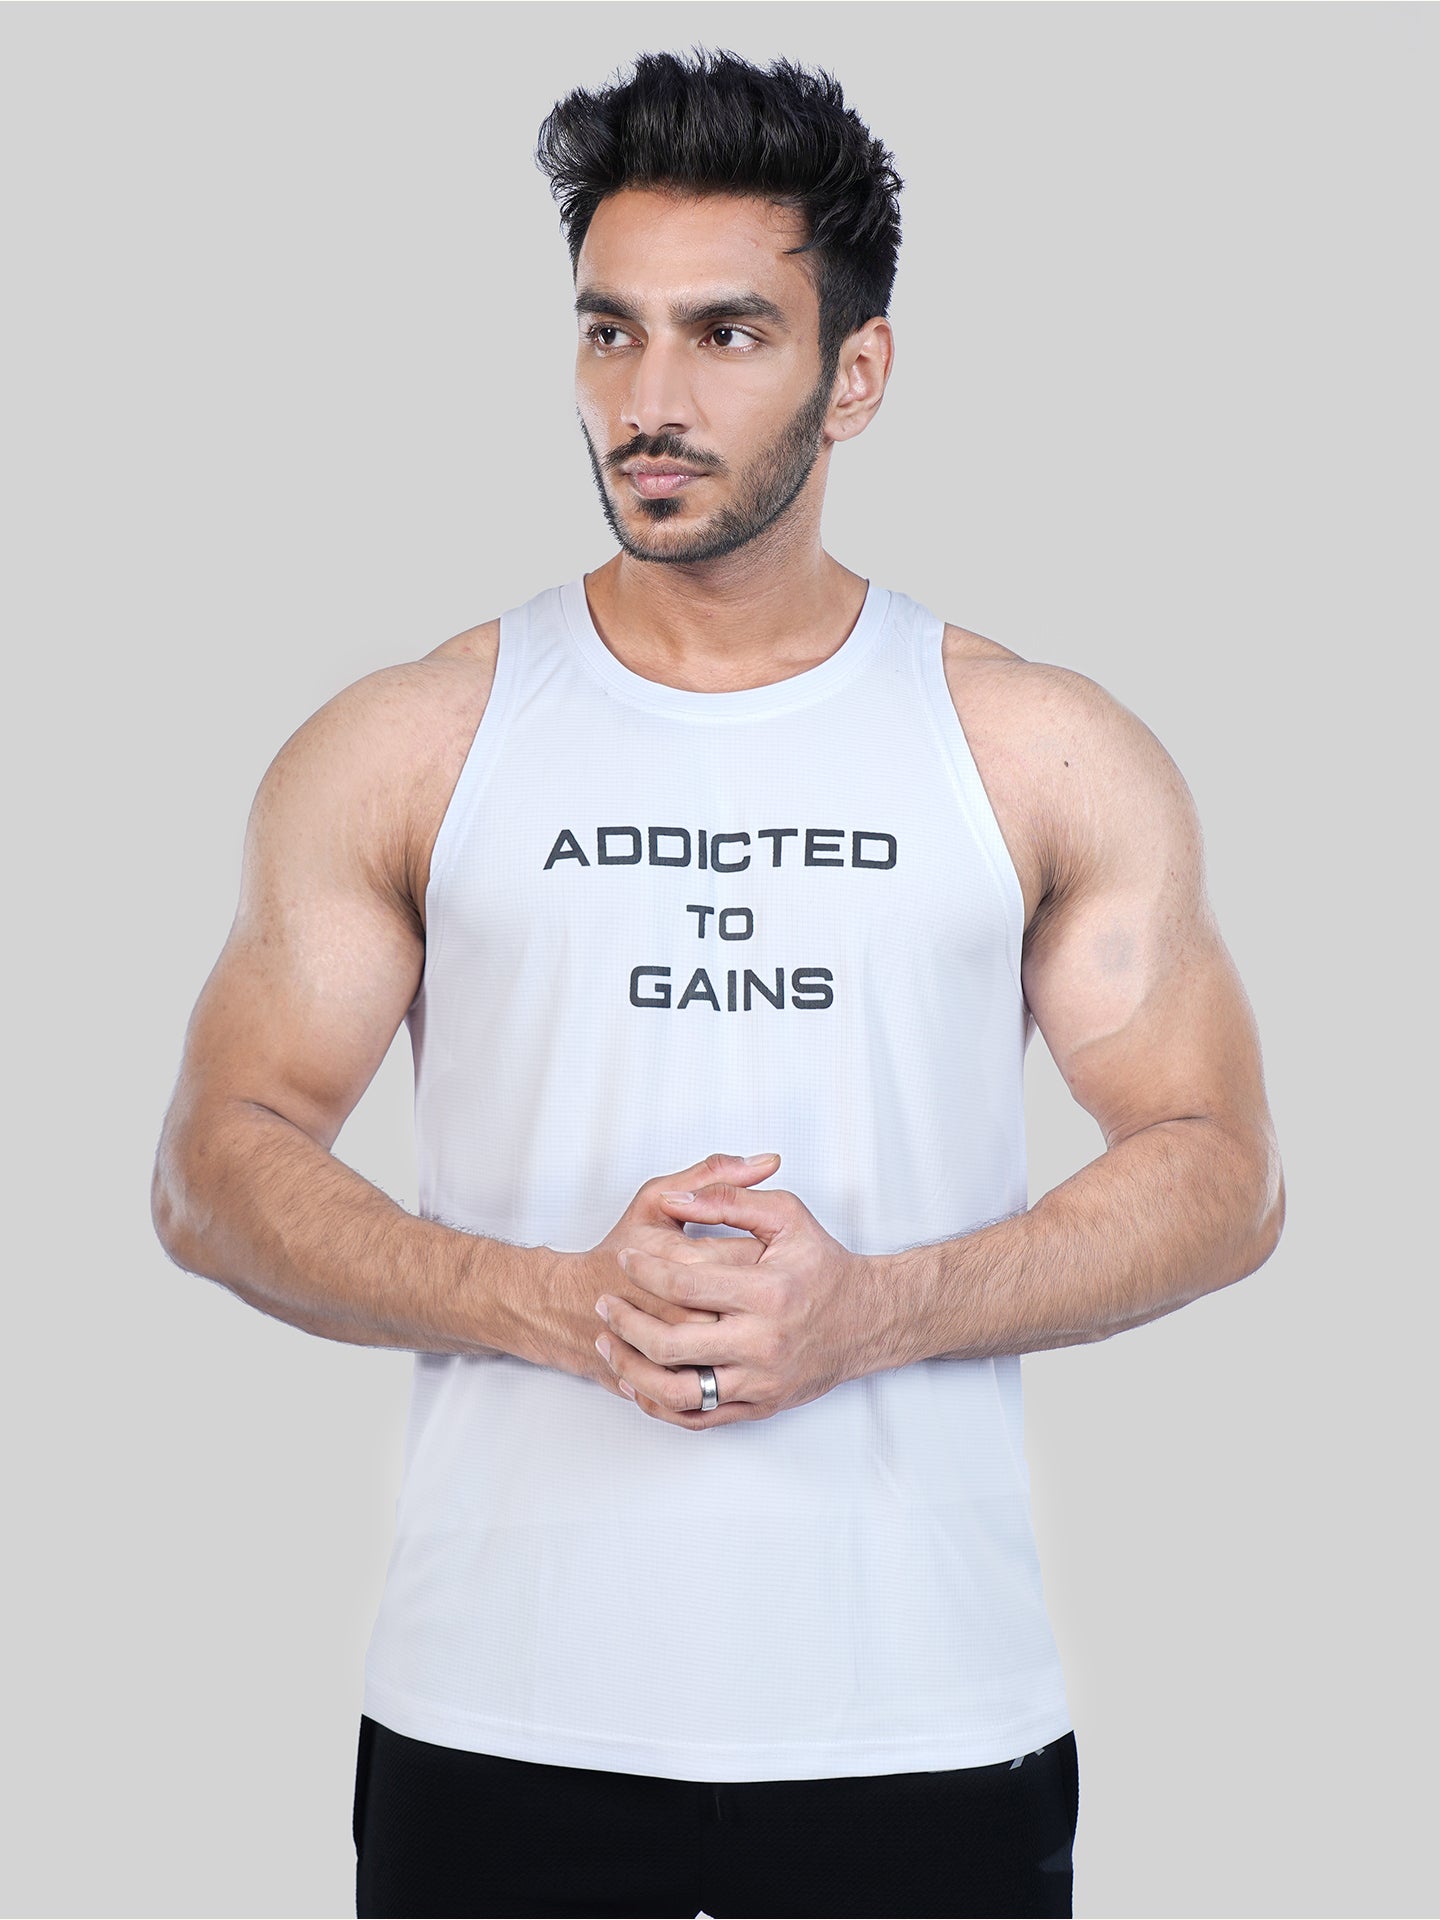 Ultra Lite GymX White Tank: Addicted To Gains - Sale